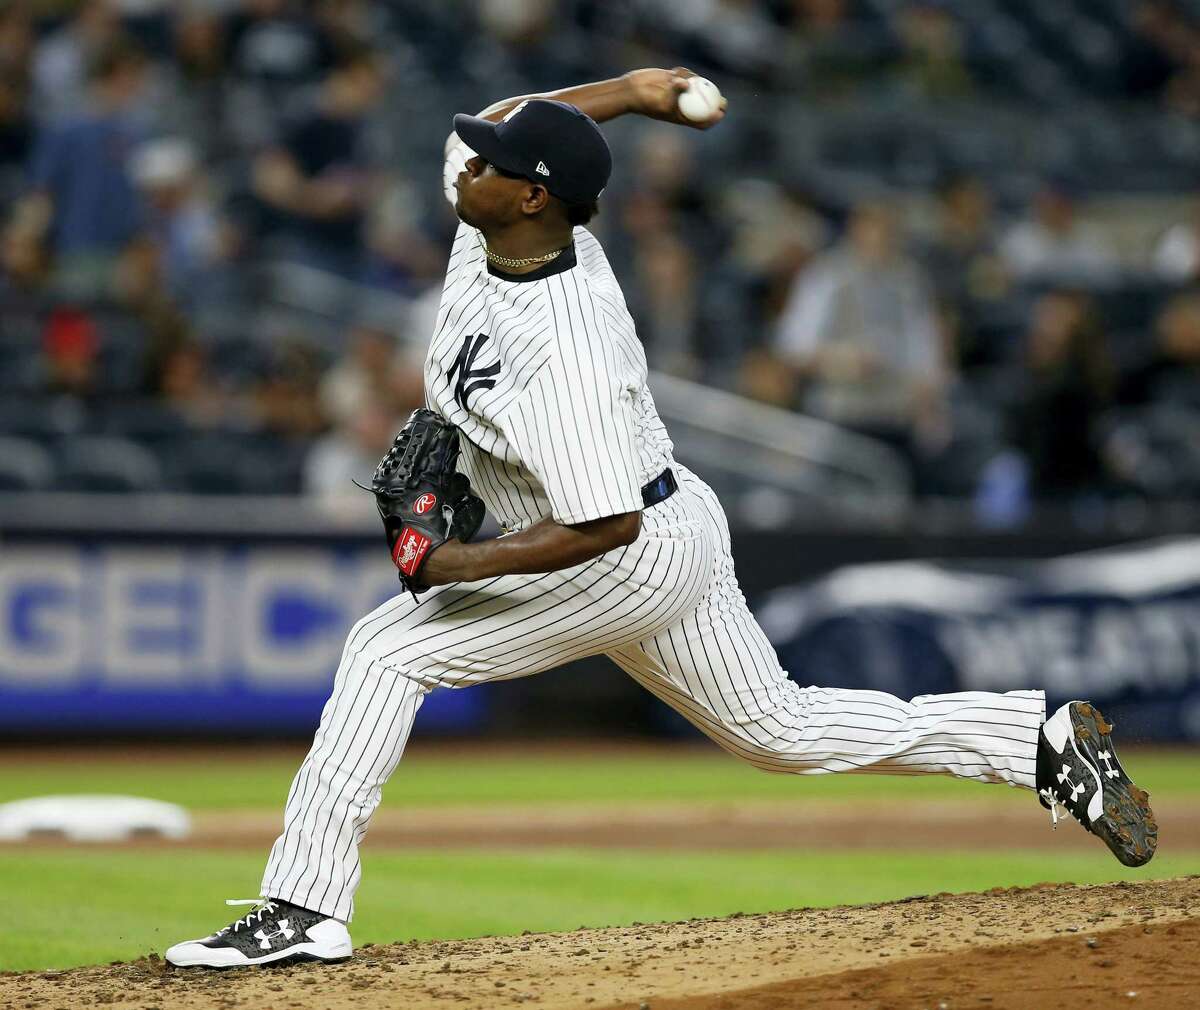 New York Yankees starting pitcher Luis Severino winds up in the sixth inning of a baseball game against the Royals at Yankee Stadium in New York on Wednesday.